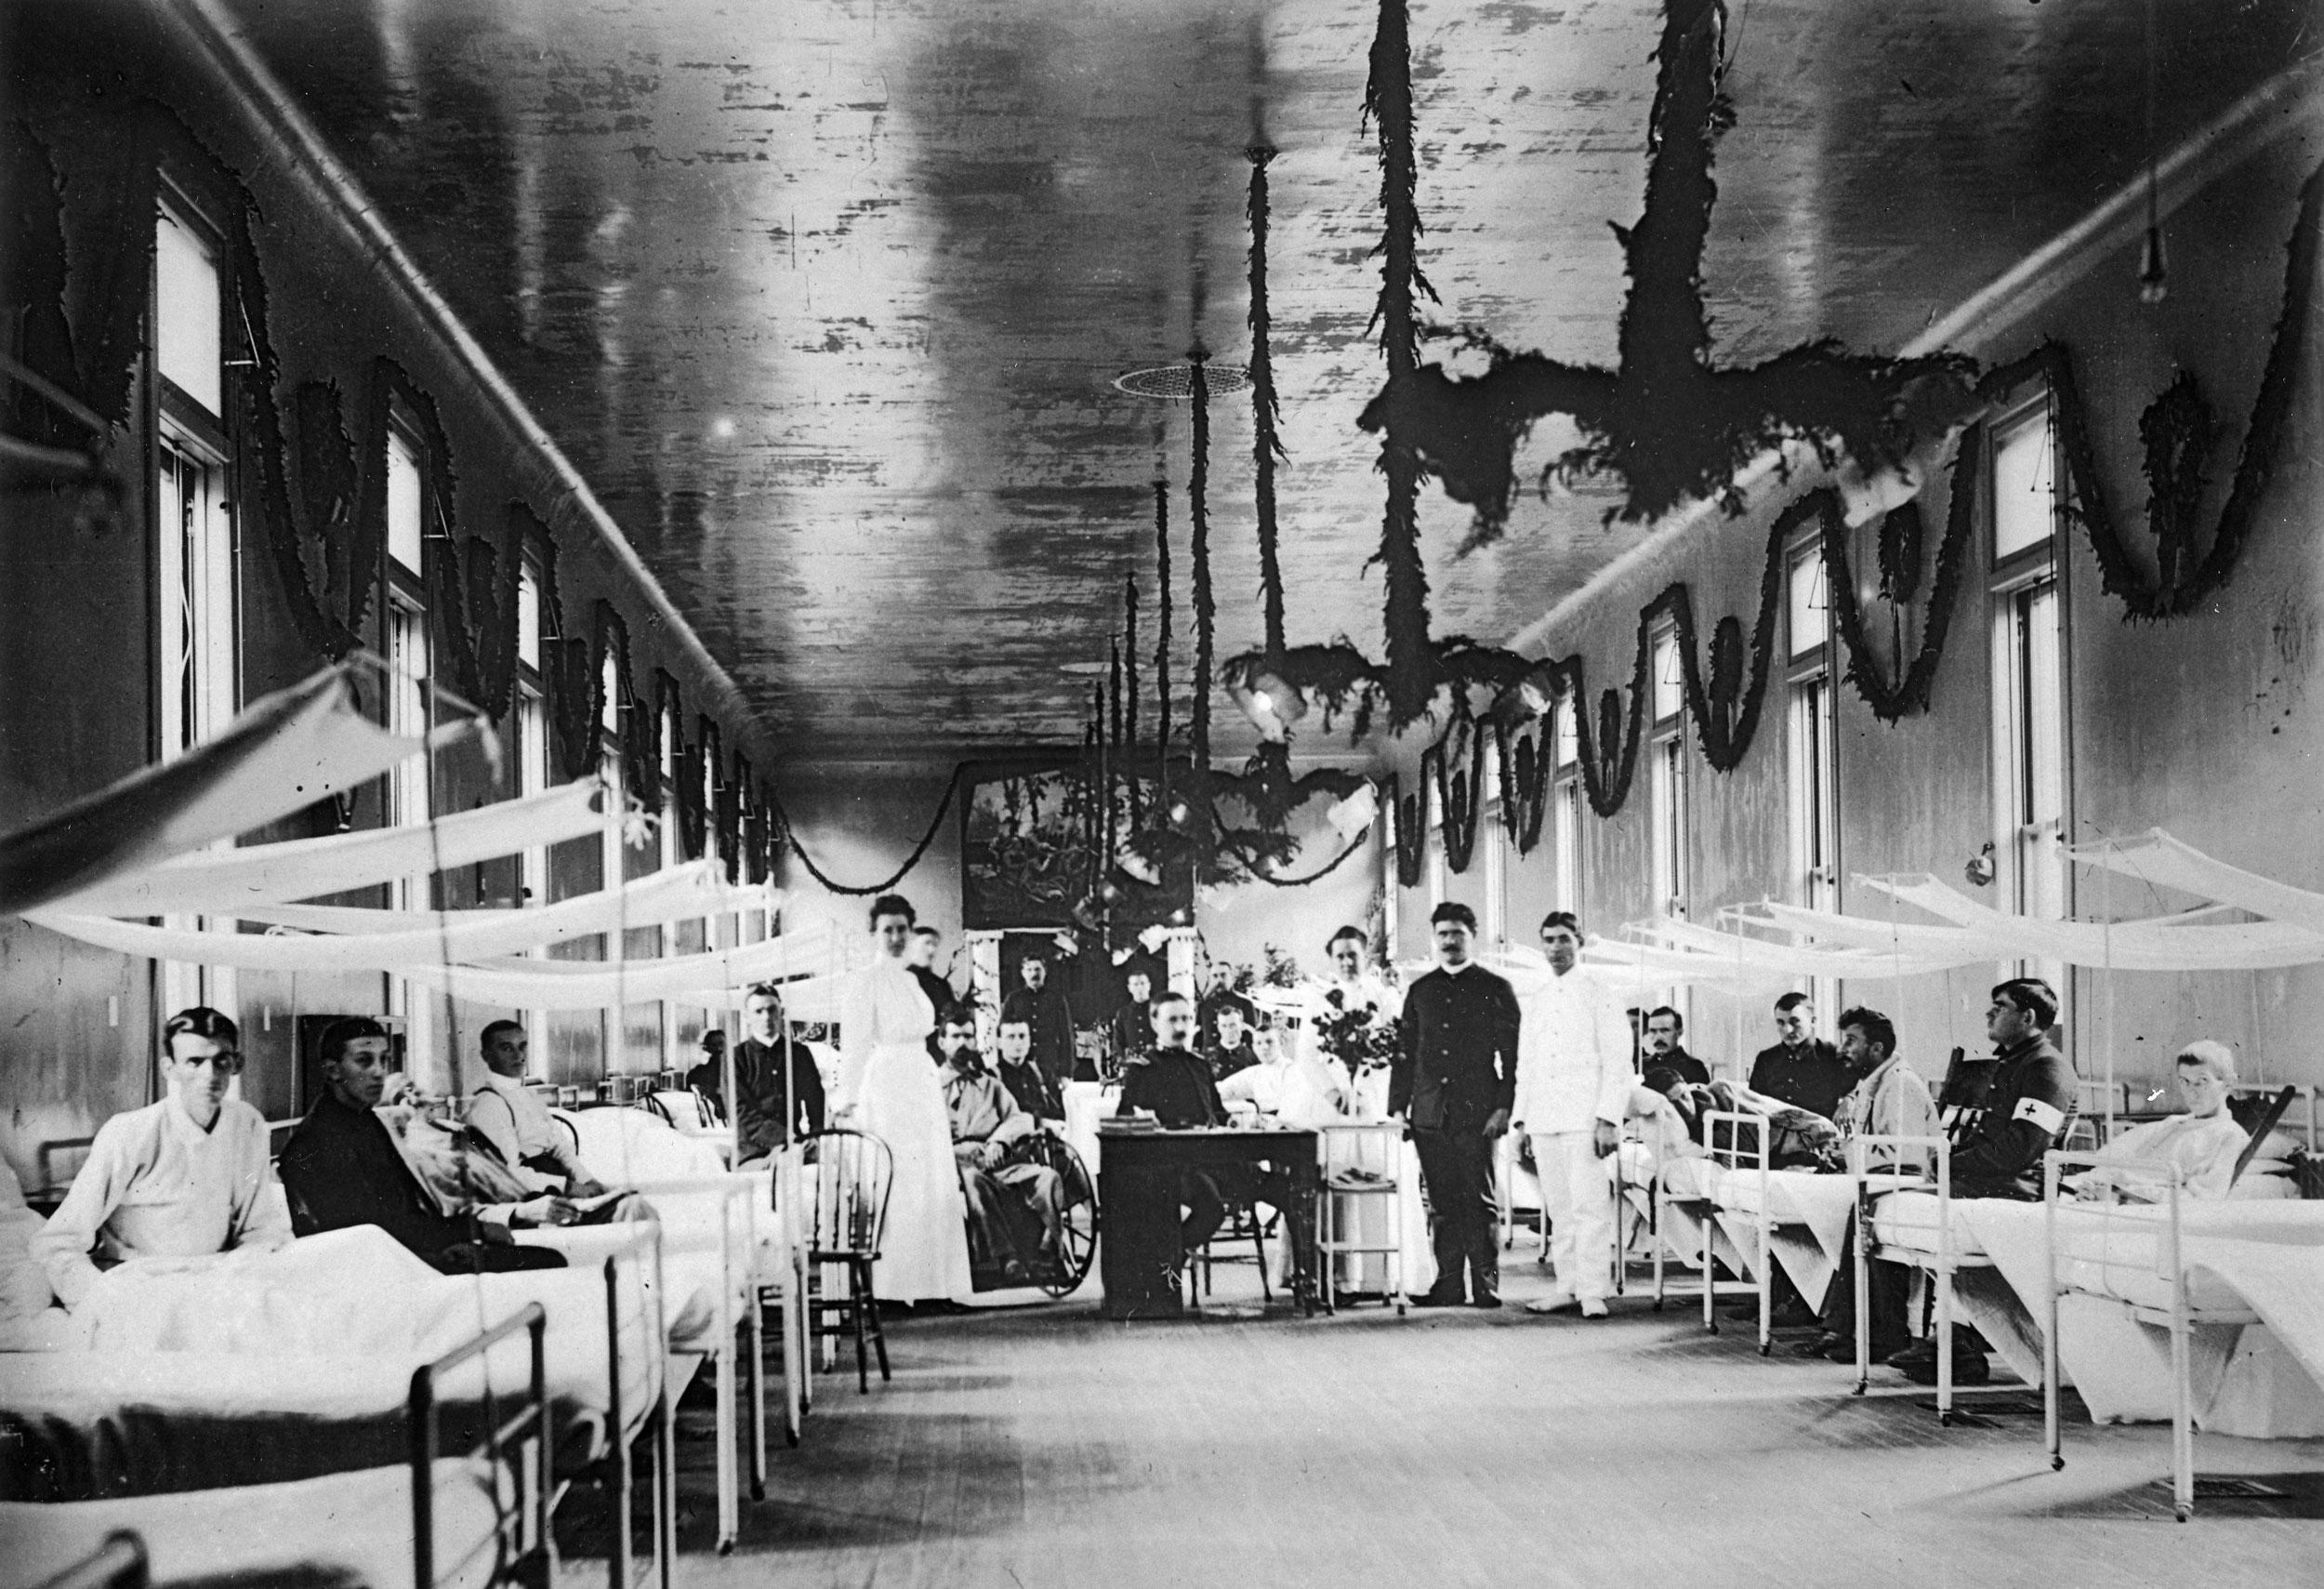 Nurses, hospital corpsmen, and patients in Letterman General Hospital